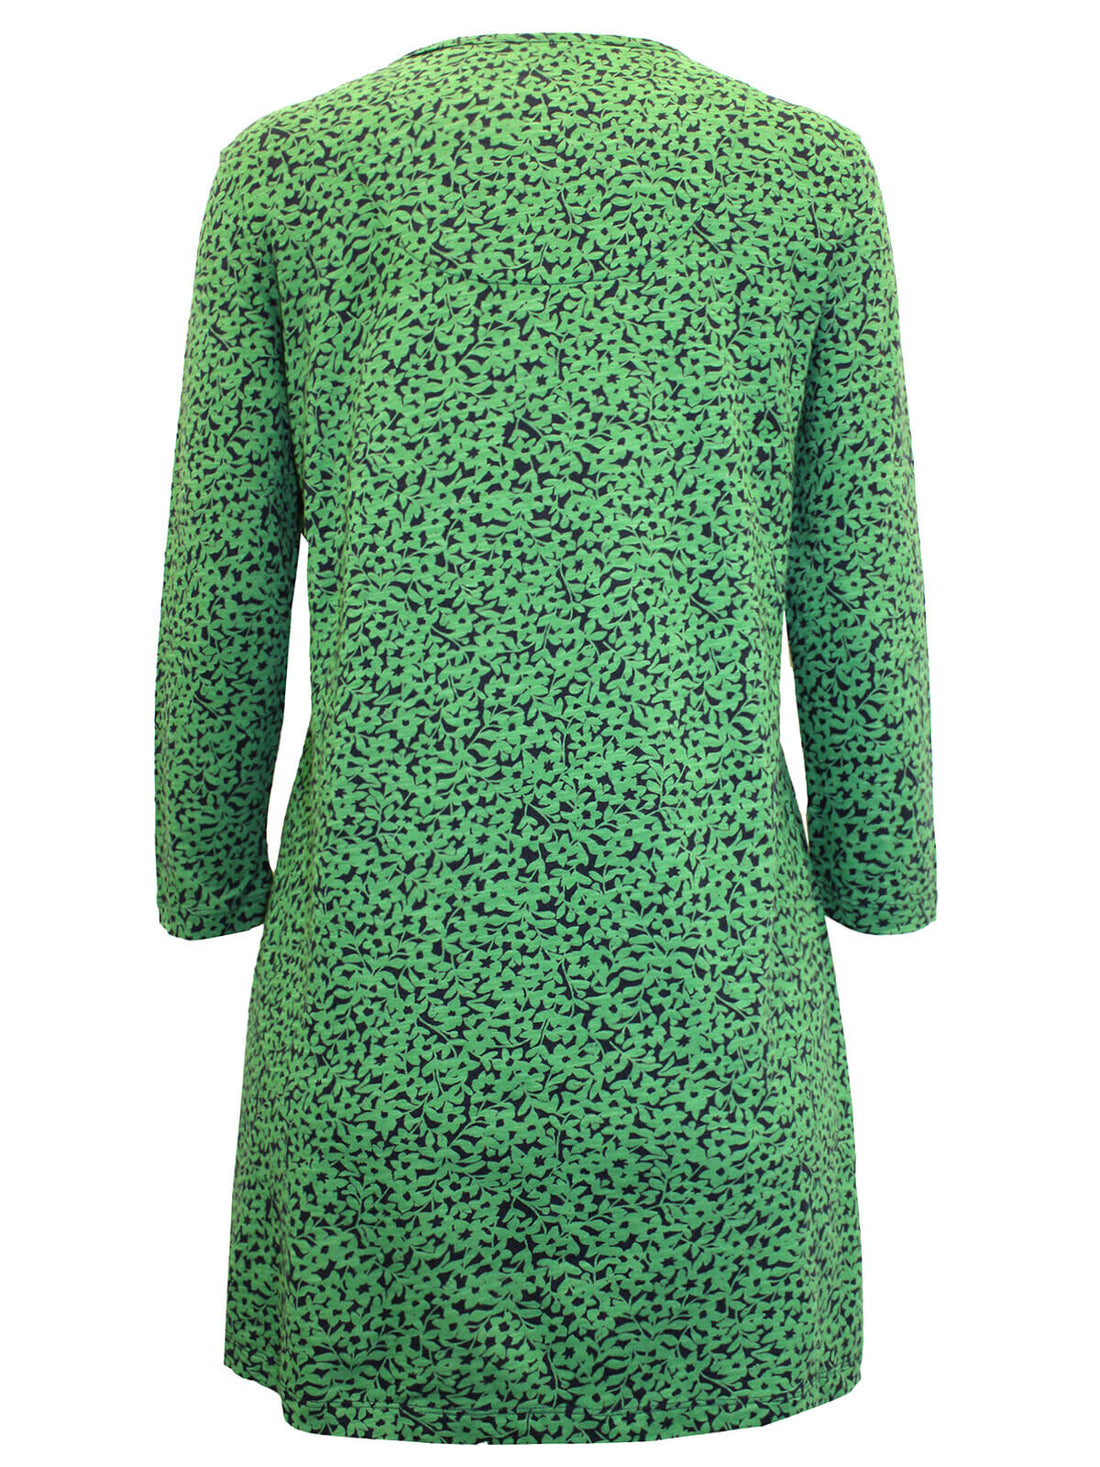 Ex Seasalt Green Floral Busy Lizzy Tunic Top in Sizes 12, 14, 16, 18, 20